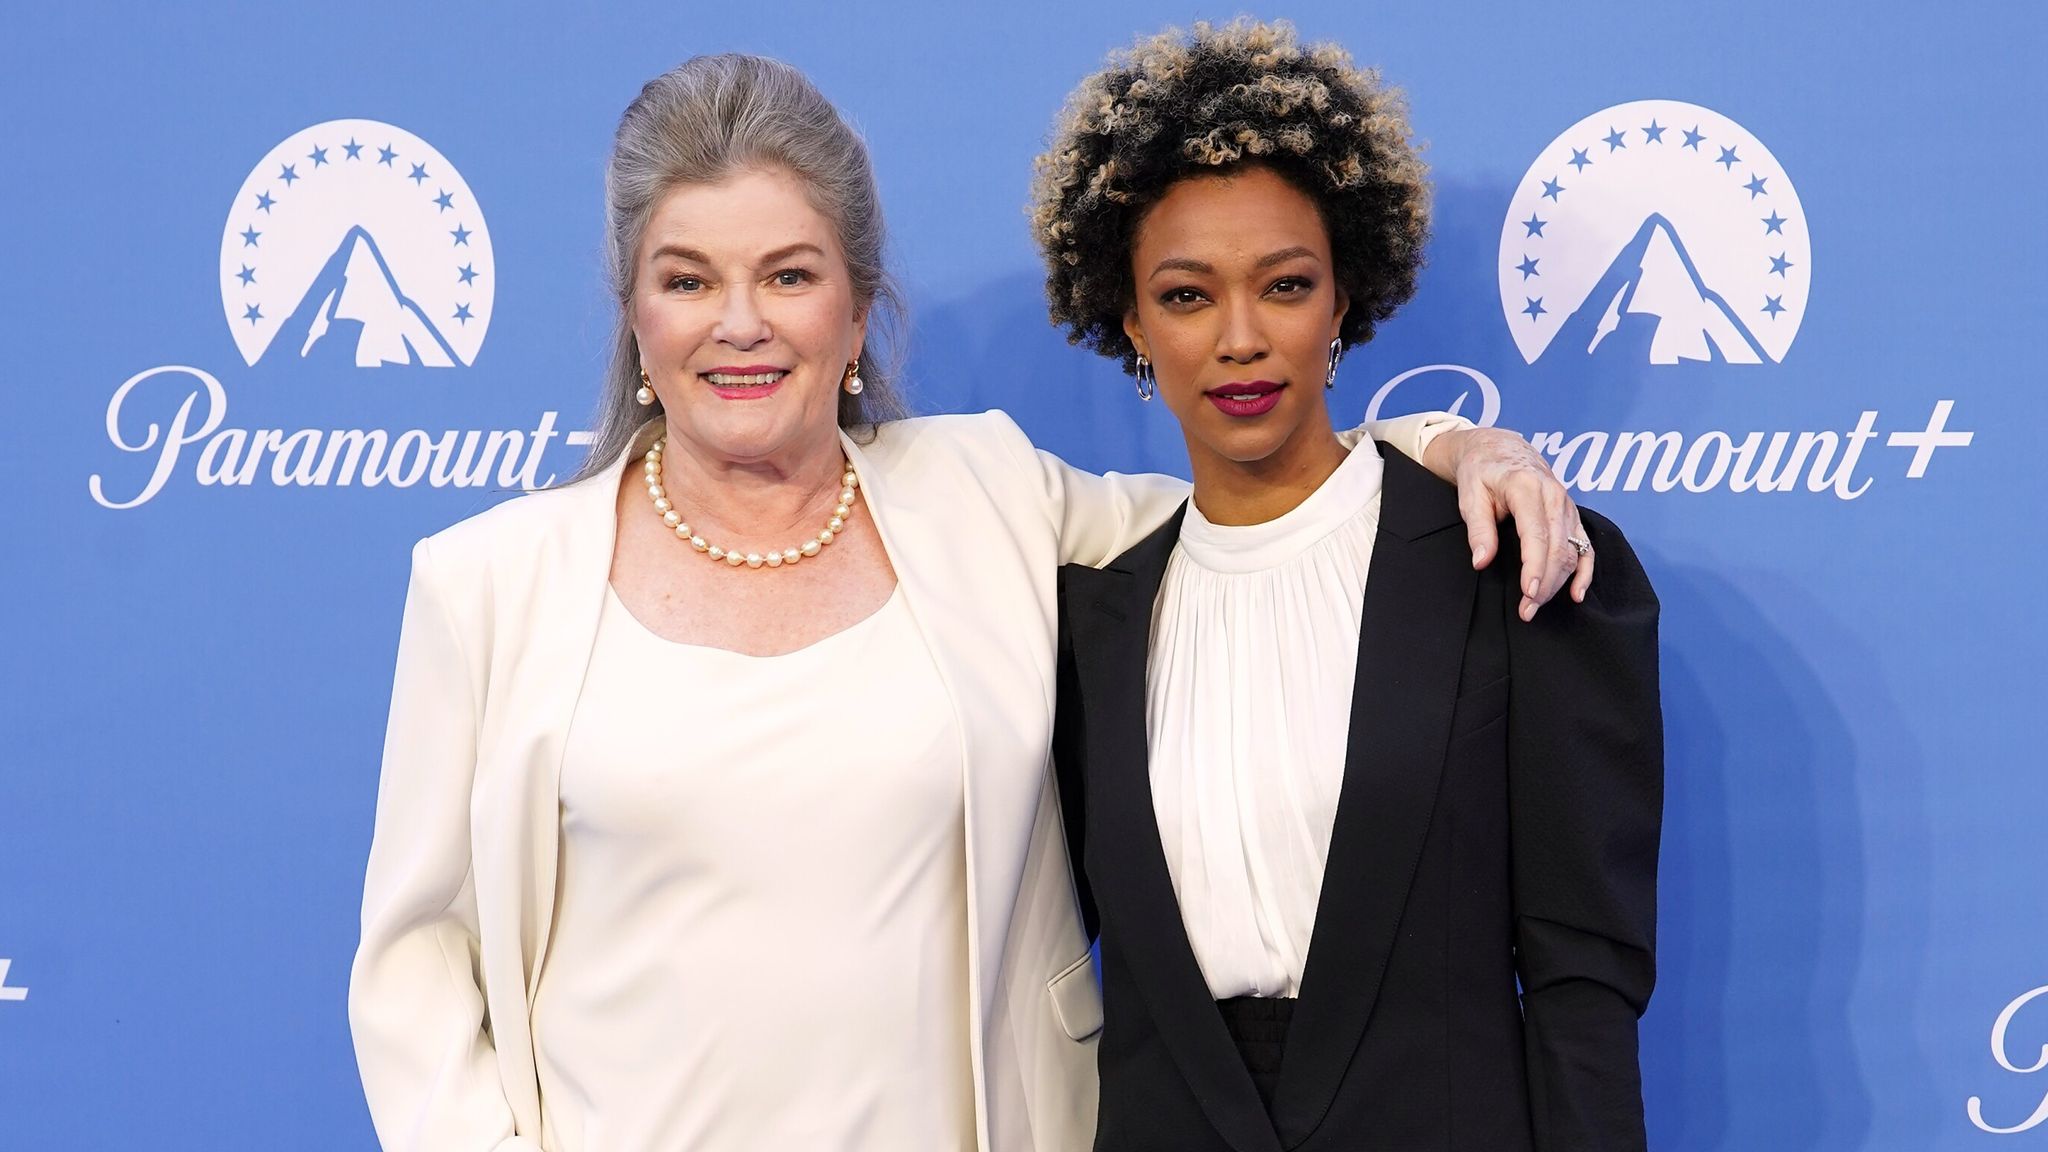 Kate Mulgrew and Sonequa Martin attending the Paramount+ UK launch event at Outernet London